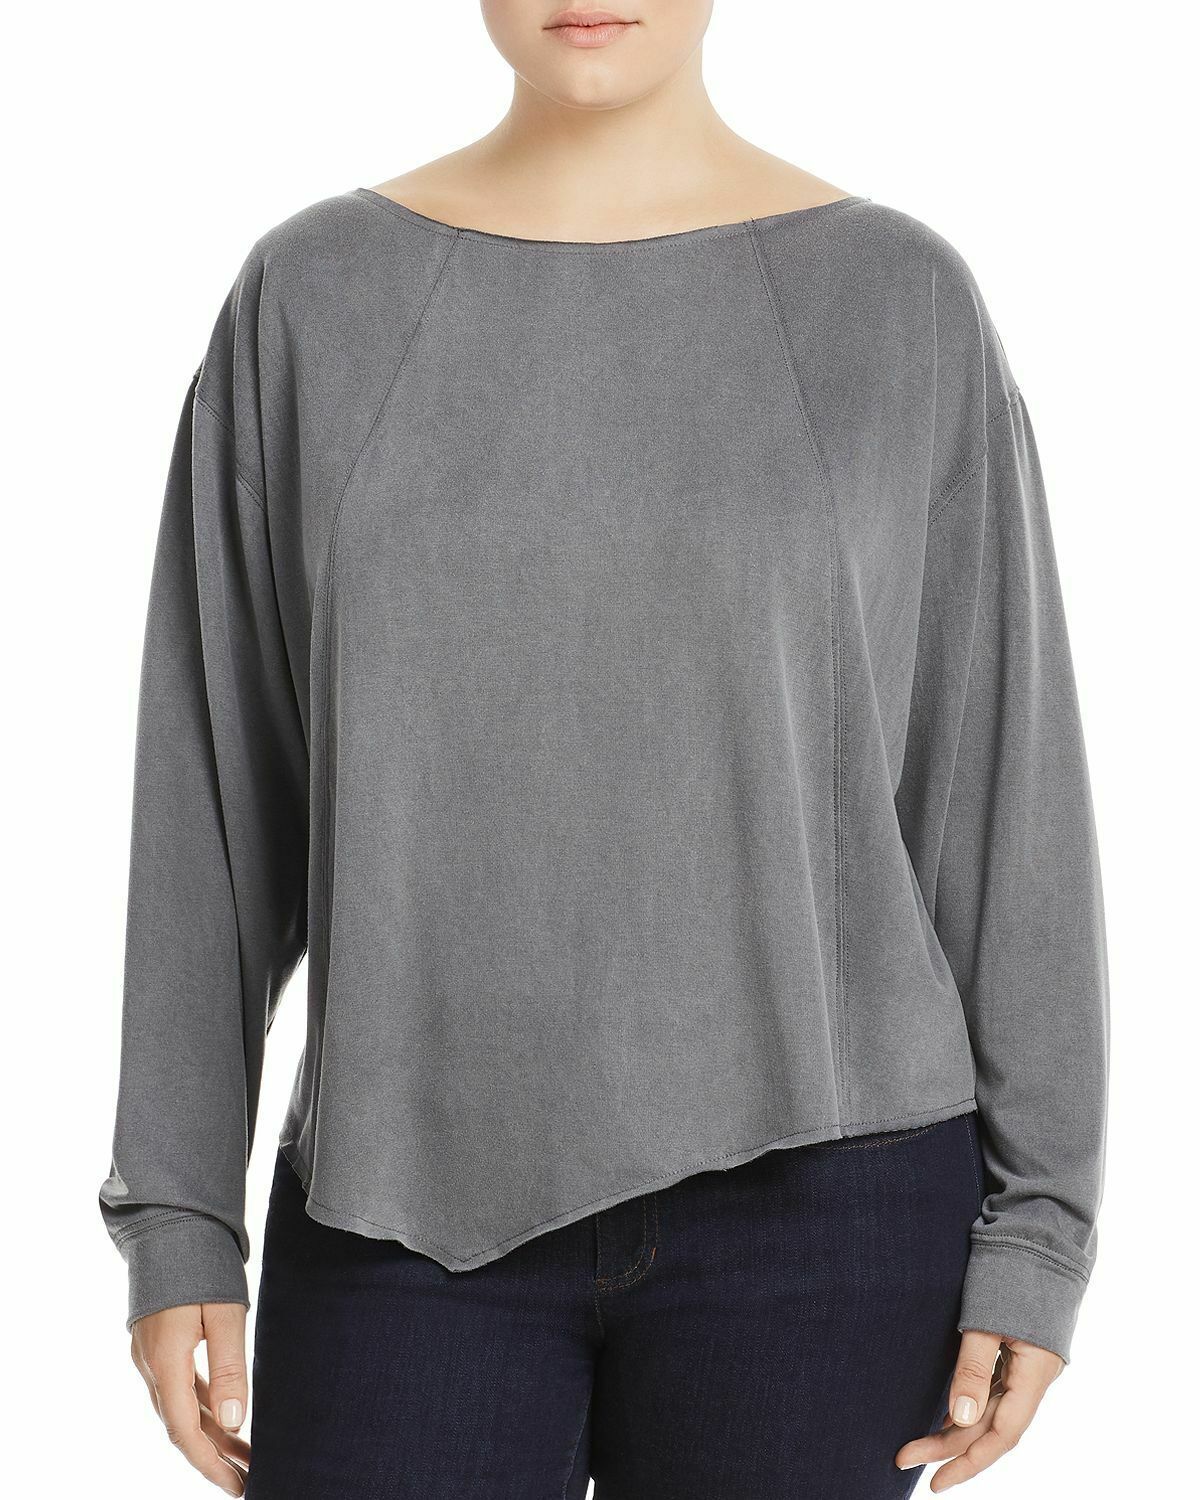 Elan Woman's Top Boat Neck Plus Size in Charcoal MSRP $108 Made in USA